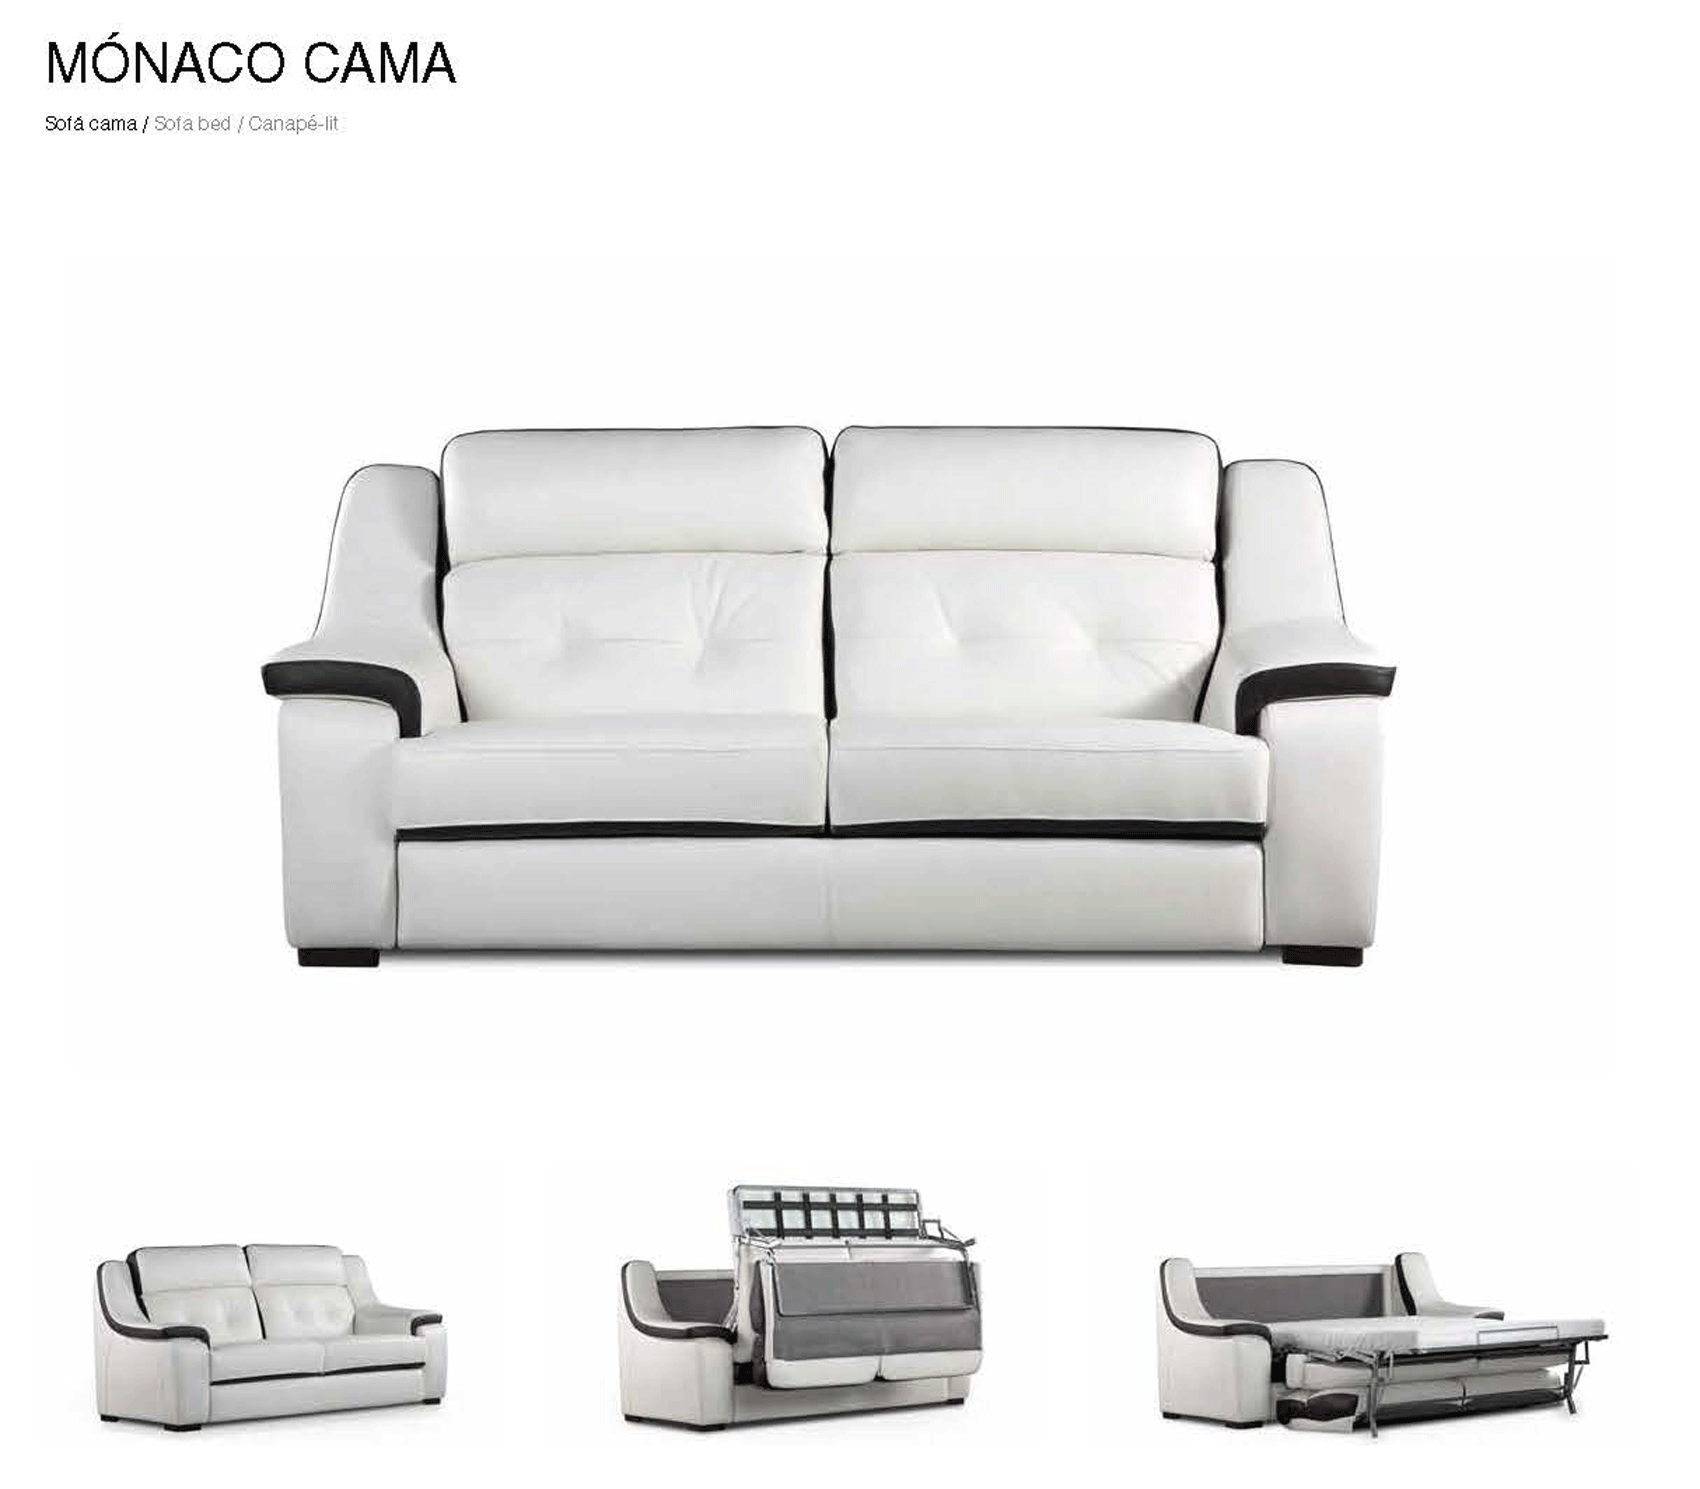 Living Room Furniture Sectionals Monaco Sofa-bed